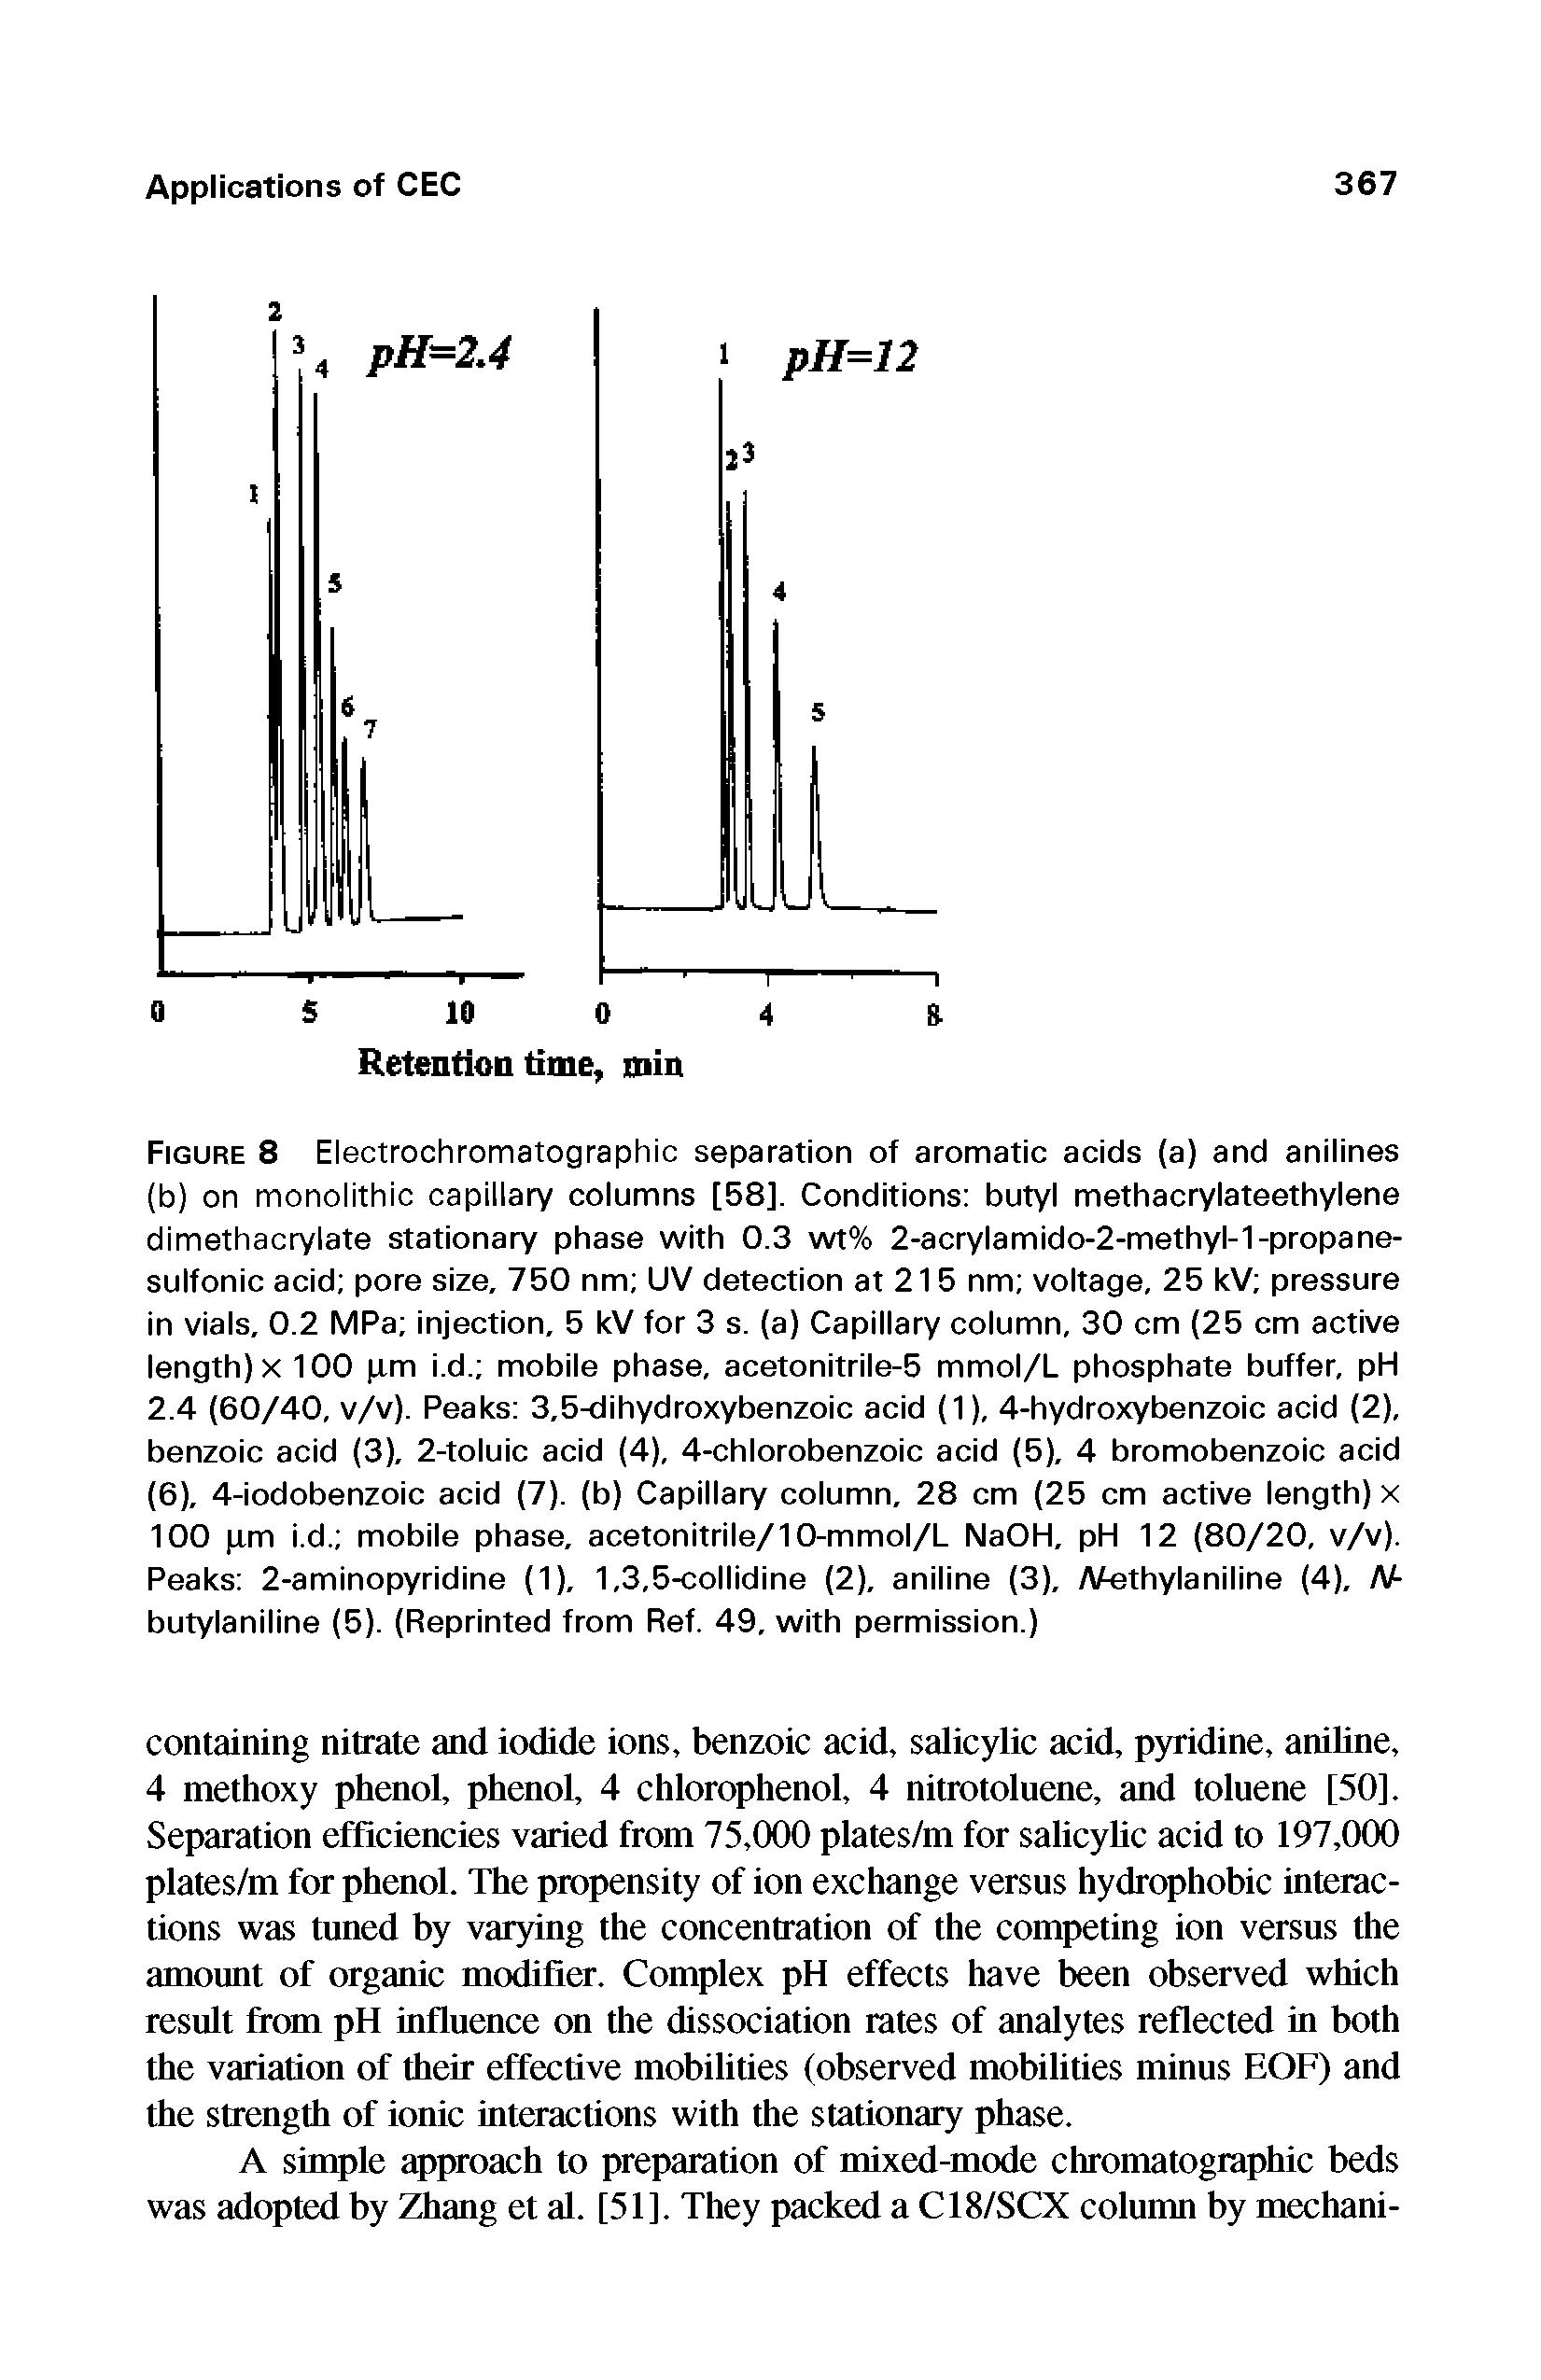 Figure 8 Electrochromatographic separation of aromatic acids (a) and anilines (b) on monolithic capillary columns [58], Conditions butyl methacrylateethylene dimethacrylate stationary phase with 0.3 wt% 2-acrylamido-2-methyl-1 -propane-sulfonic acid pore size, 750 nm UV detection at 21 5 nm voltage, 25 kV pressure in vials, 0.2 MPa injection, 5 kV for 3 s. (a) Capillary column, 30 cm (25 cm active length) x 100 pm i.d. mobile phase, acetonitrile-5 mmol/L phosphate buffer, pH 2.4 (60/40, v/v). Peaks 3,5-dihydroxybenzoic acid (1), 4-hydroxybenzoic acid (2), benzoic acid (3), 2-toluic acid (4), 4-chlorobenzoic acid (5), 4 bromobenzoic acid (6), 4-iodobenzoic acid (7). (b) Capillary column, 28 cm (25 cm active length) x 100 pm i.d. mobile phase, acetonitrile/10-mmol/L NaOH, pH 12 (80/20, v/v). Peaks 2-aminopyridine (1), 1,3,5-collidine (2), aniline (3), AAethylaniline (4), N-butylaniline (5). (Reprinted from Ref. 49, with permission.)...